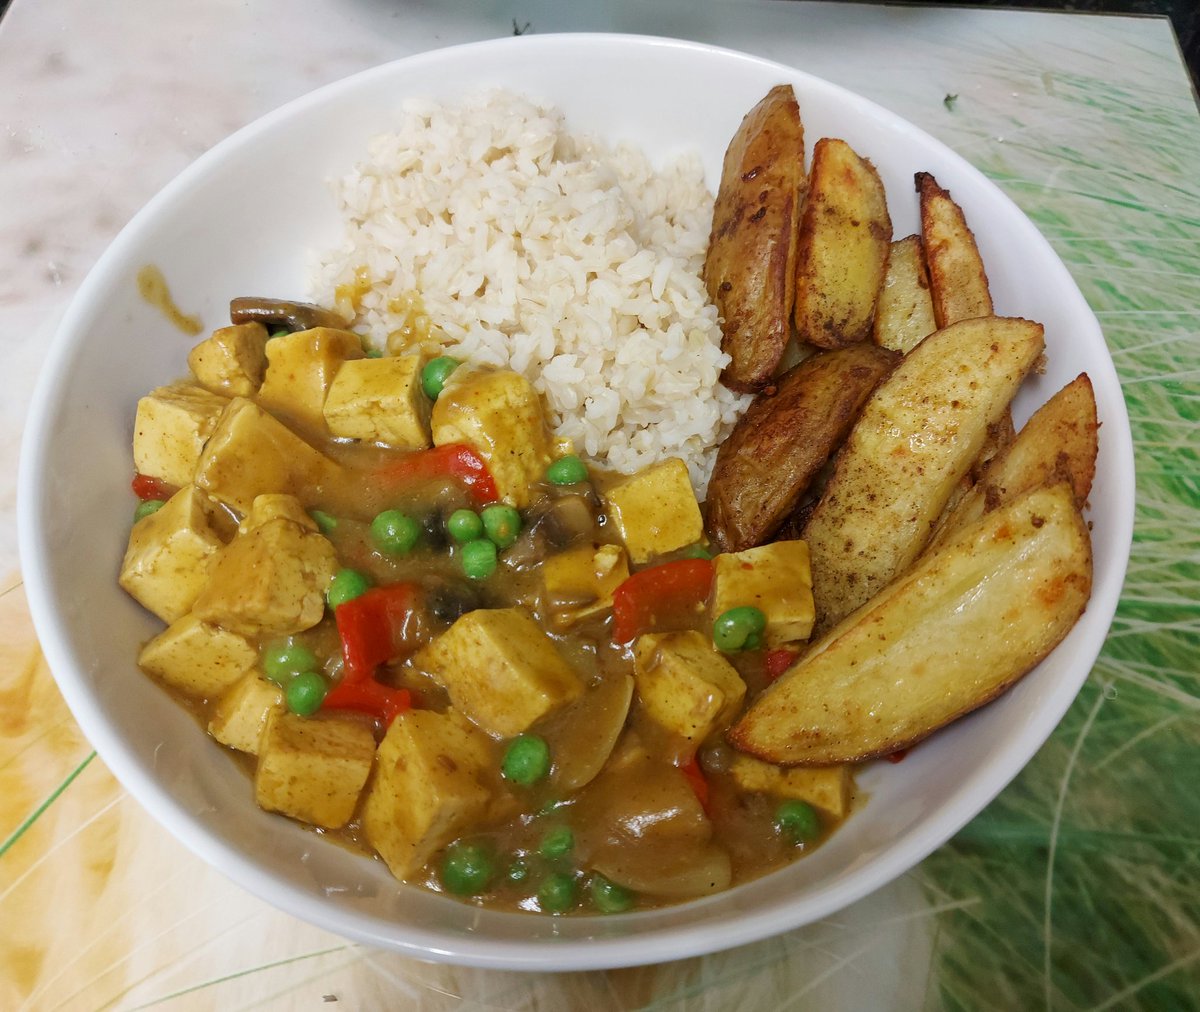 Chinese style fakeaway. 
Because by making it at home, I know exactly what went inside it and my kitchen and hands are clean💚😋🌱🥰🌹
Tofu curry with brown rice and homemade chips seasoned with vinegar, salt,pepper and garlic powder before baking.
#vegan #homemade #veganfood